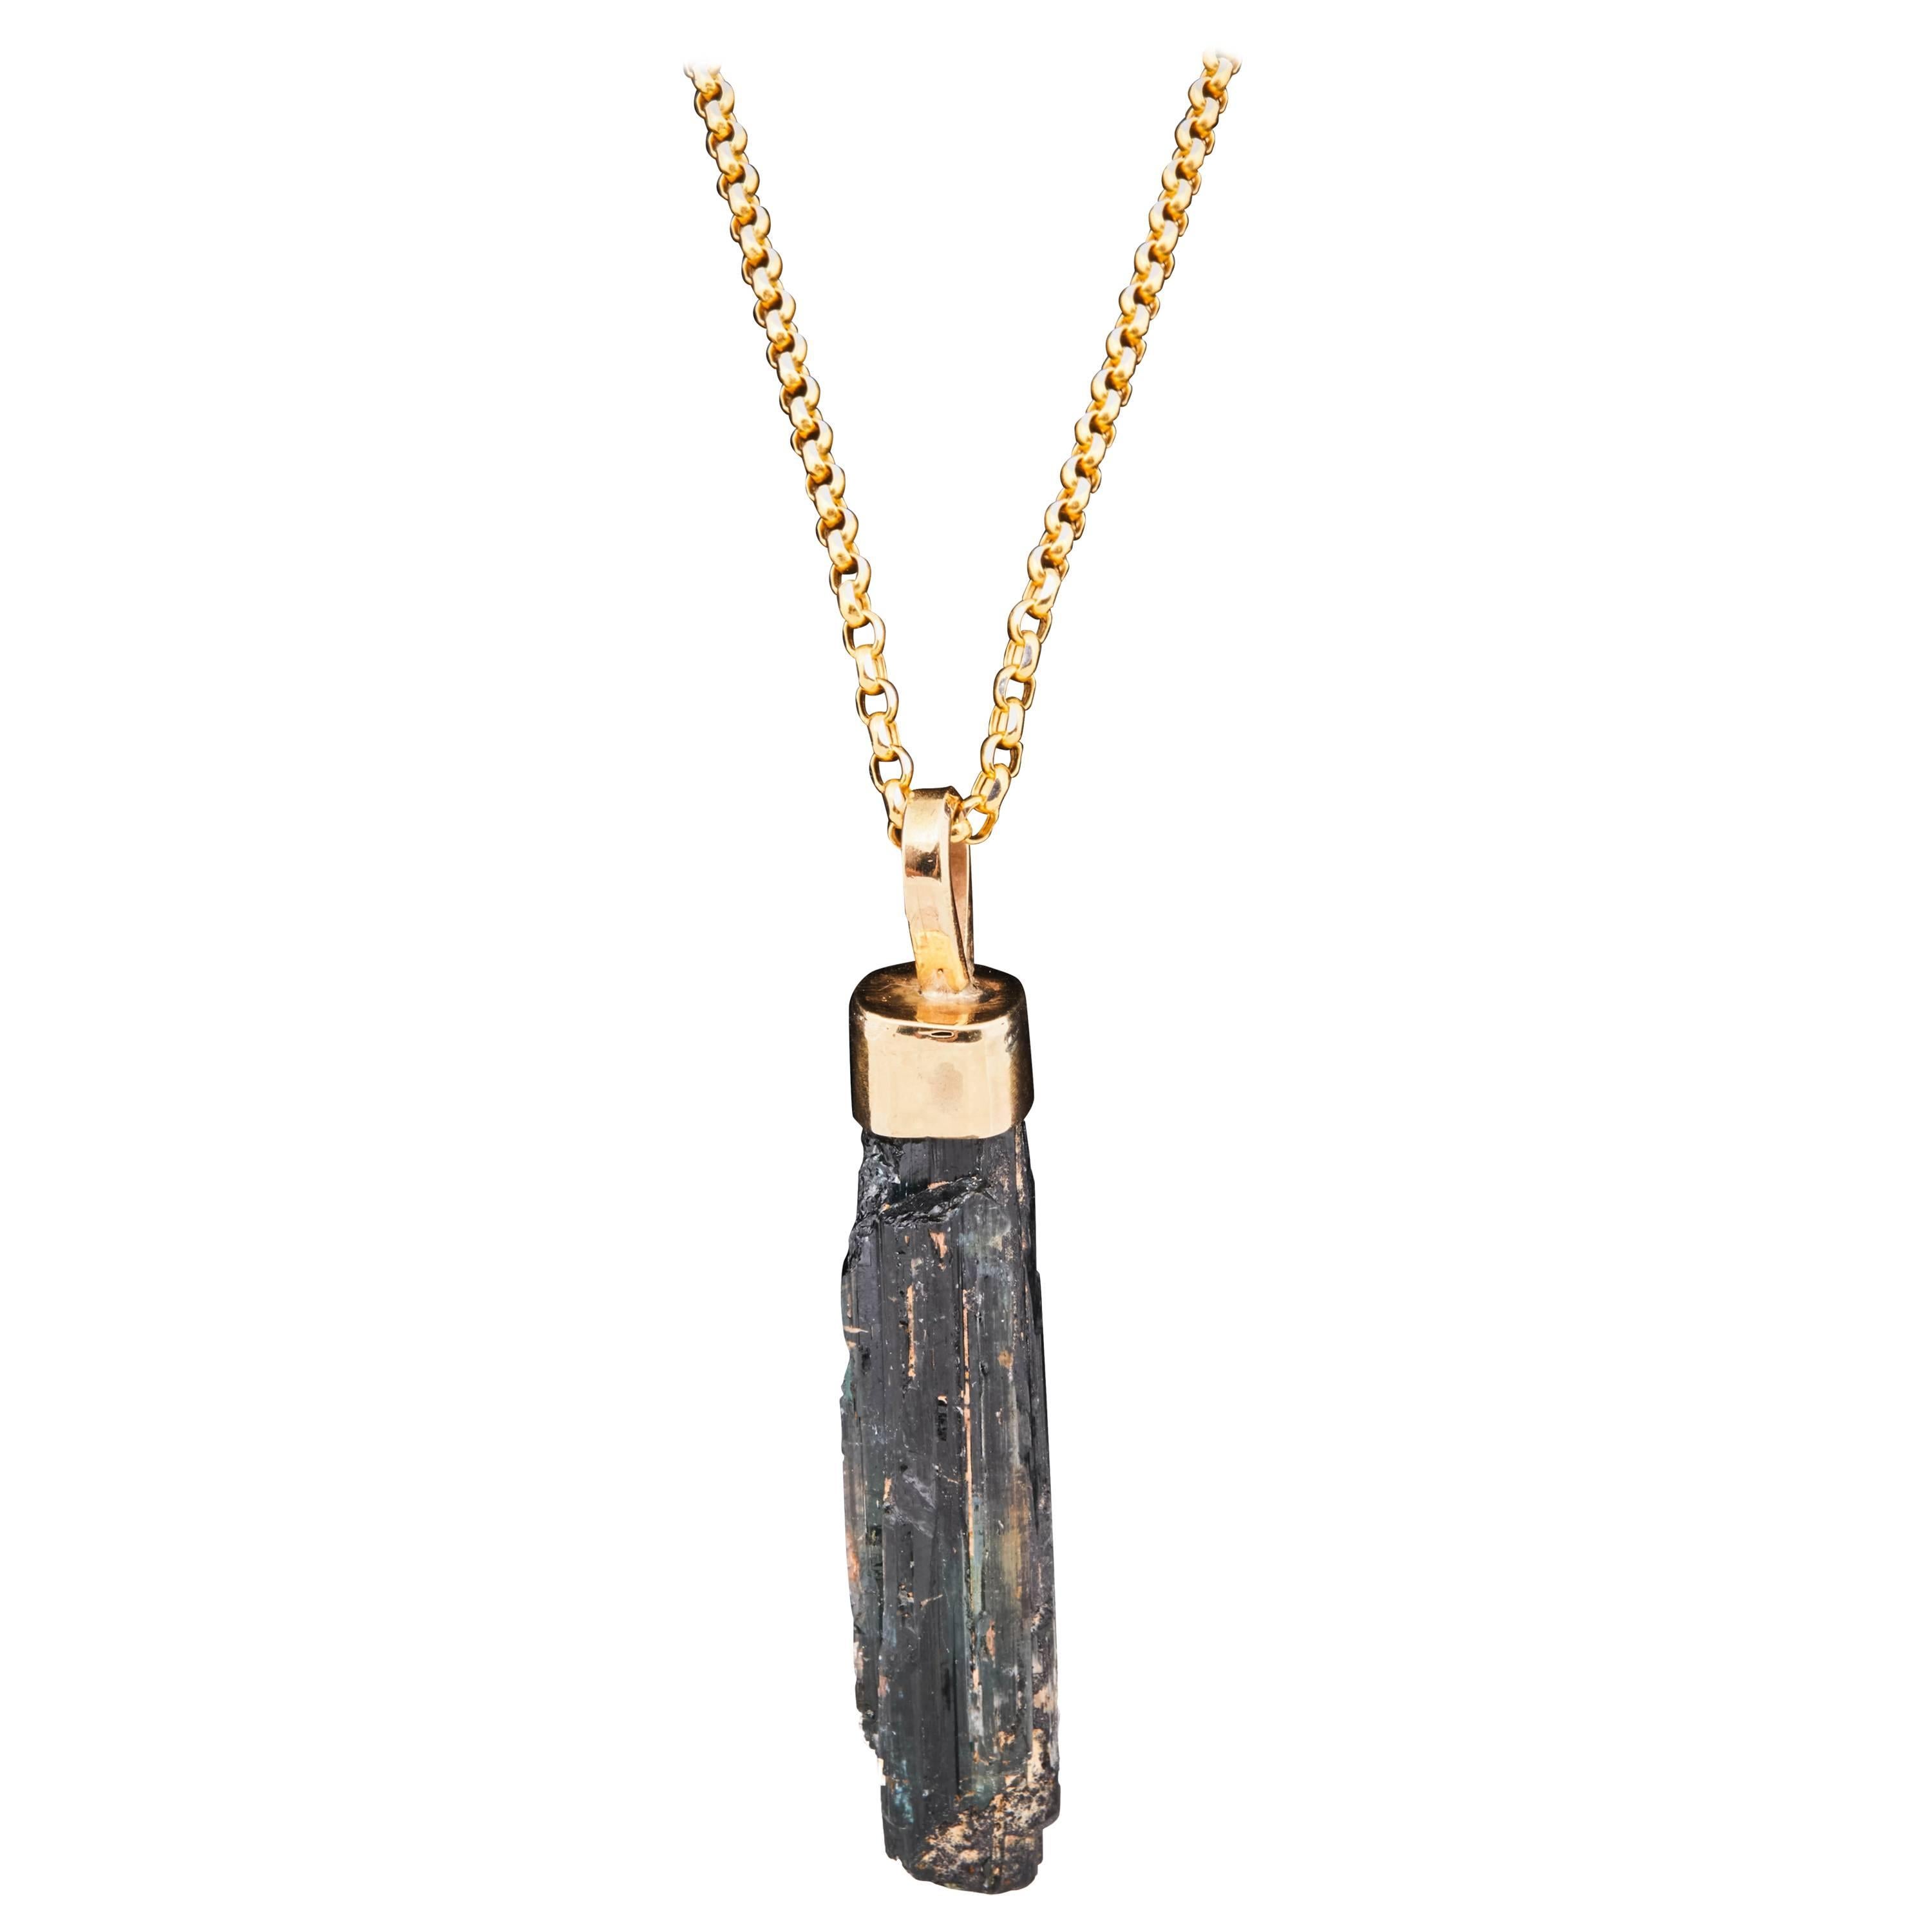 Natural Tourmaline Mounted in 18k Gold on Italian 18k Gold Chain